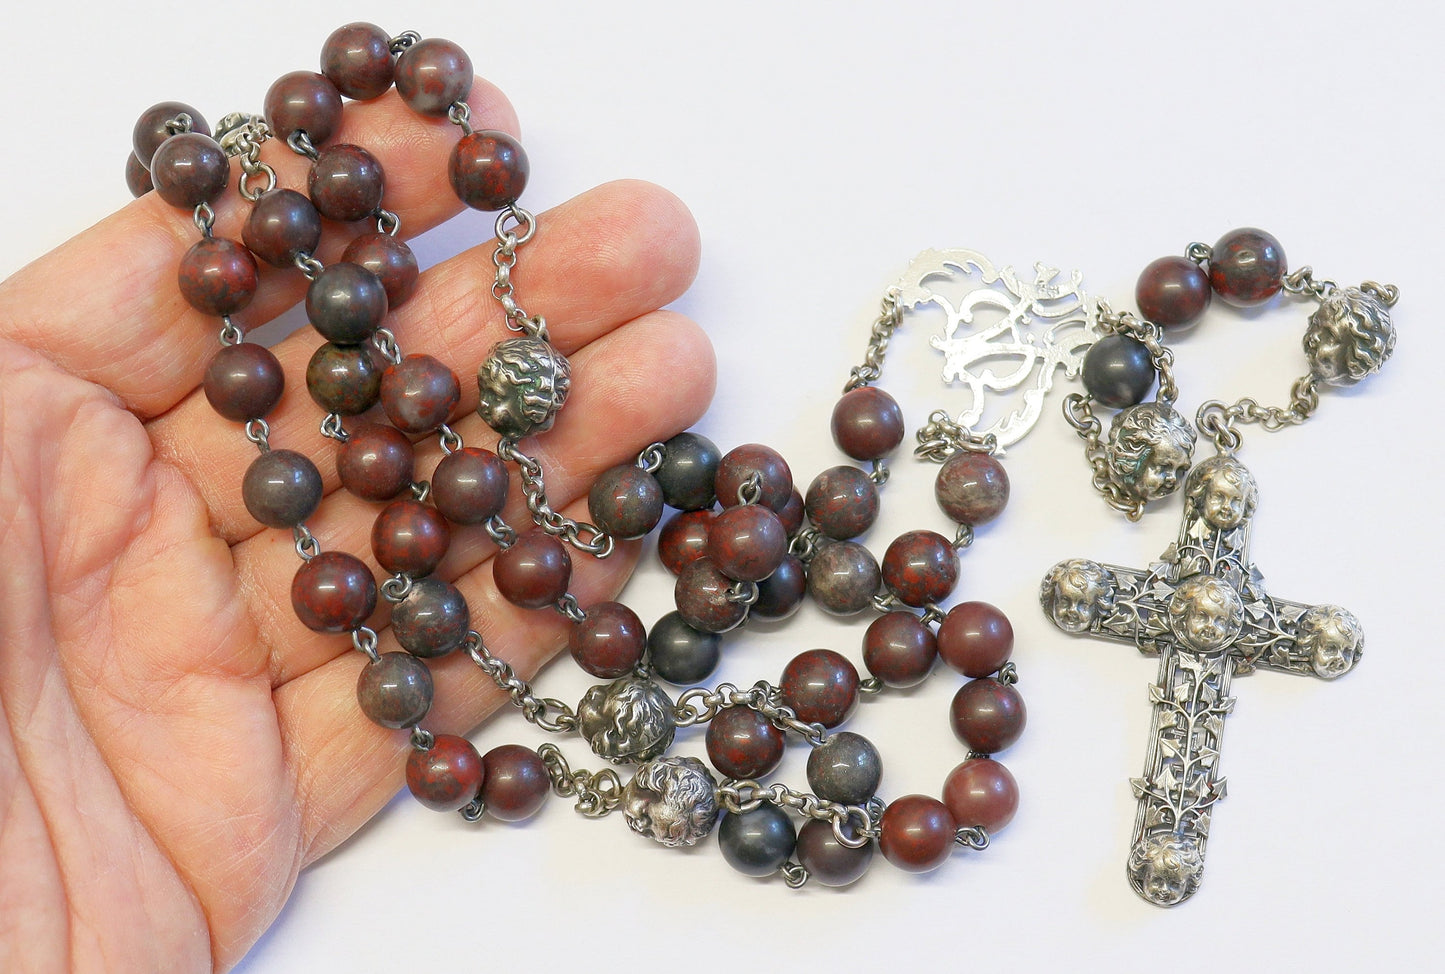 Bloodstone & Sterling Silver Vintage Catholic Rosary Early 20th Cent. - Unique Design.